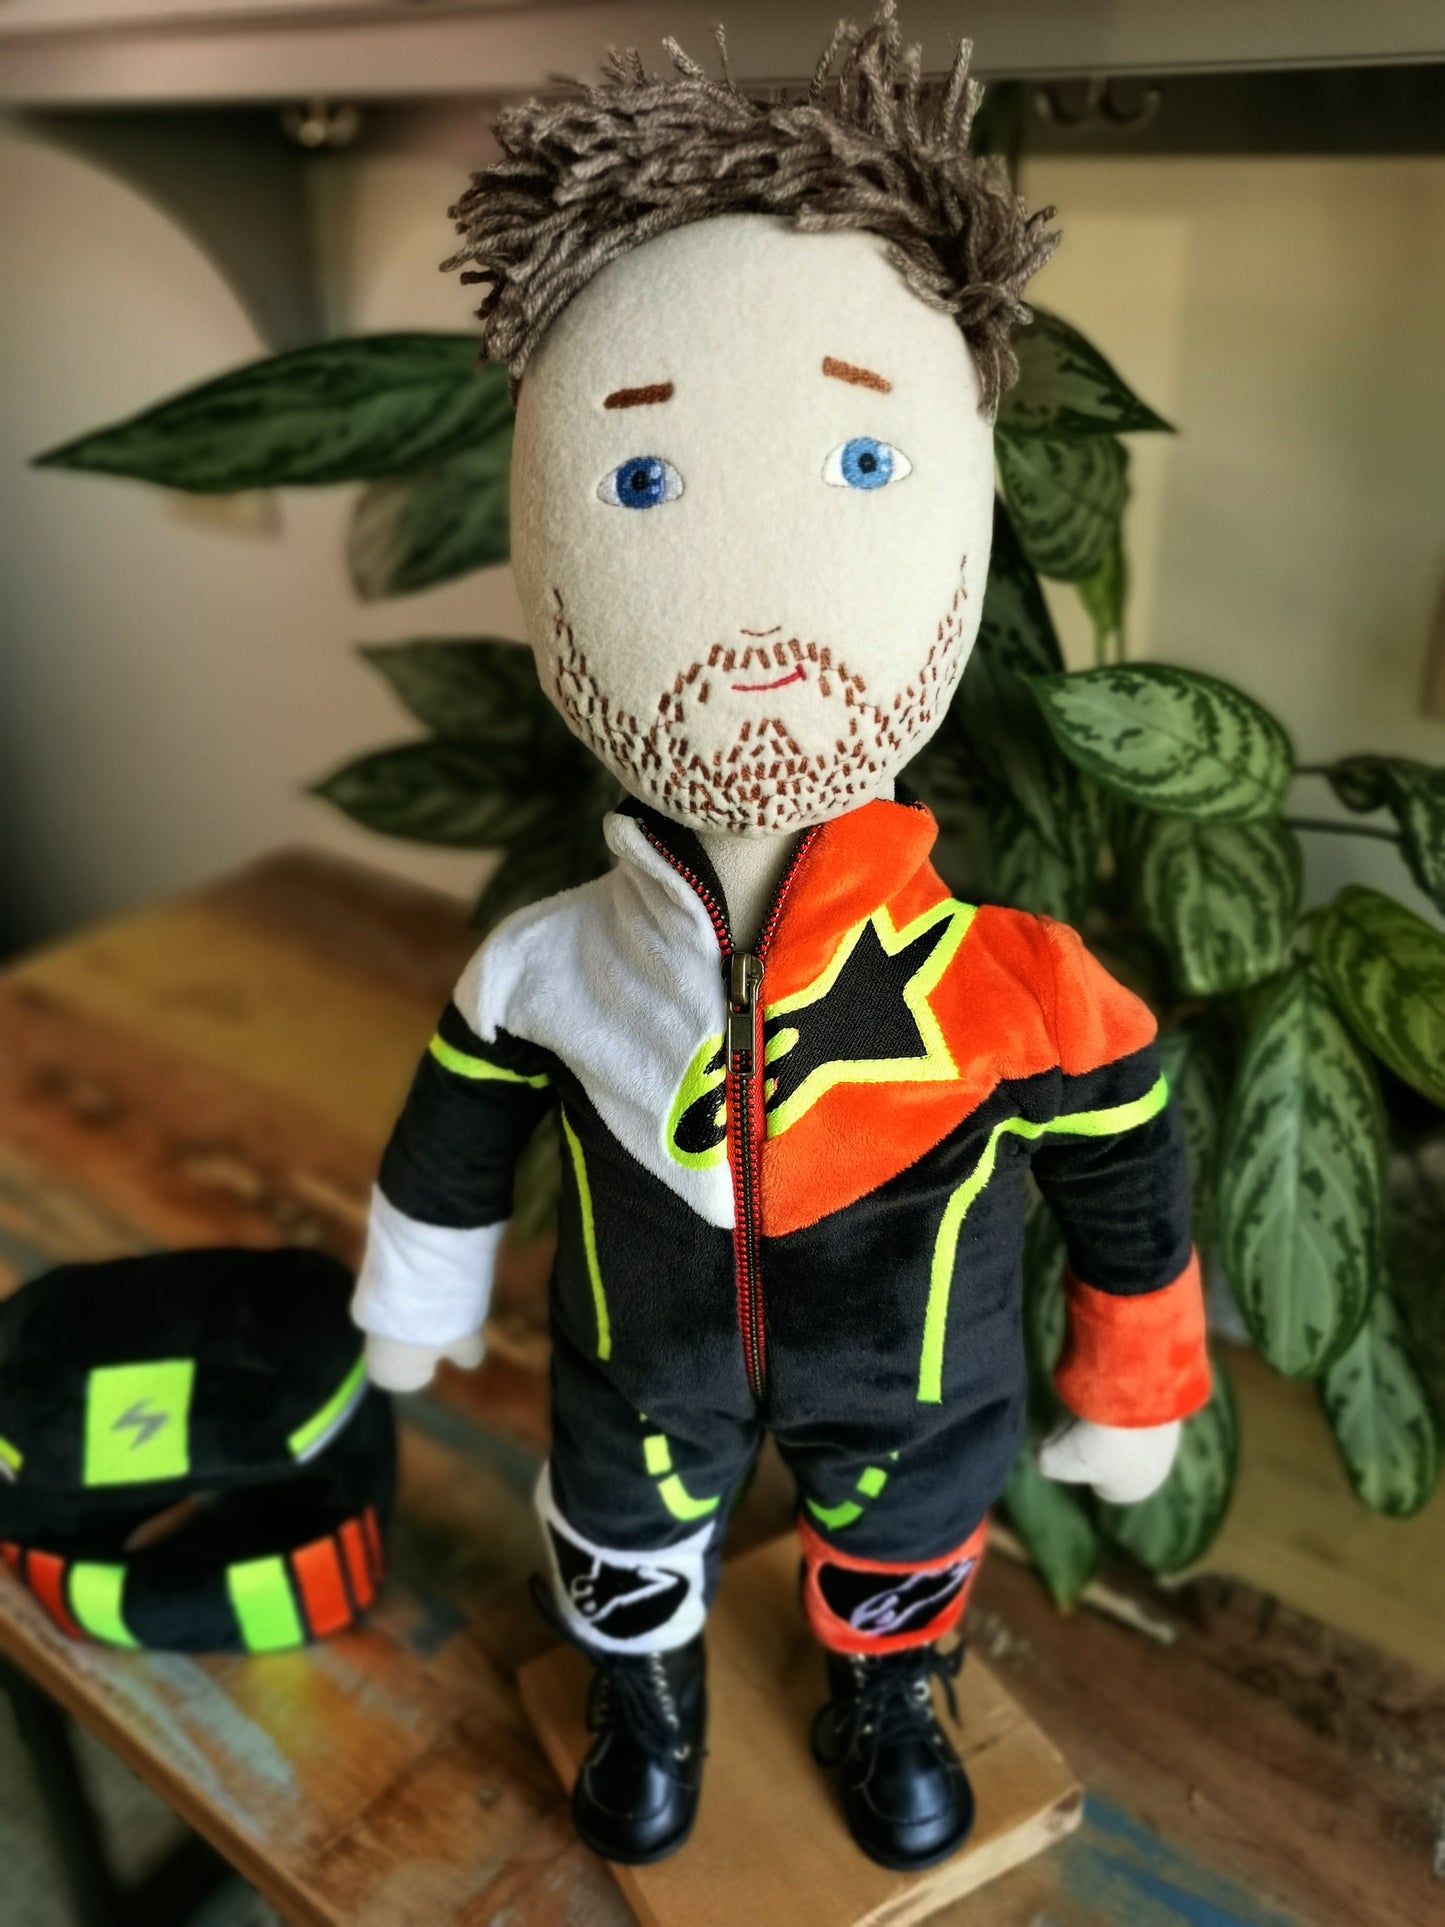 Motorcyclist Portrait Doll based on photos, Mini me soft doll, likeness doll in Motorcycle suit and helmet, 50 cm